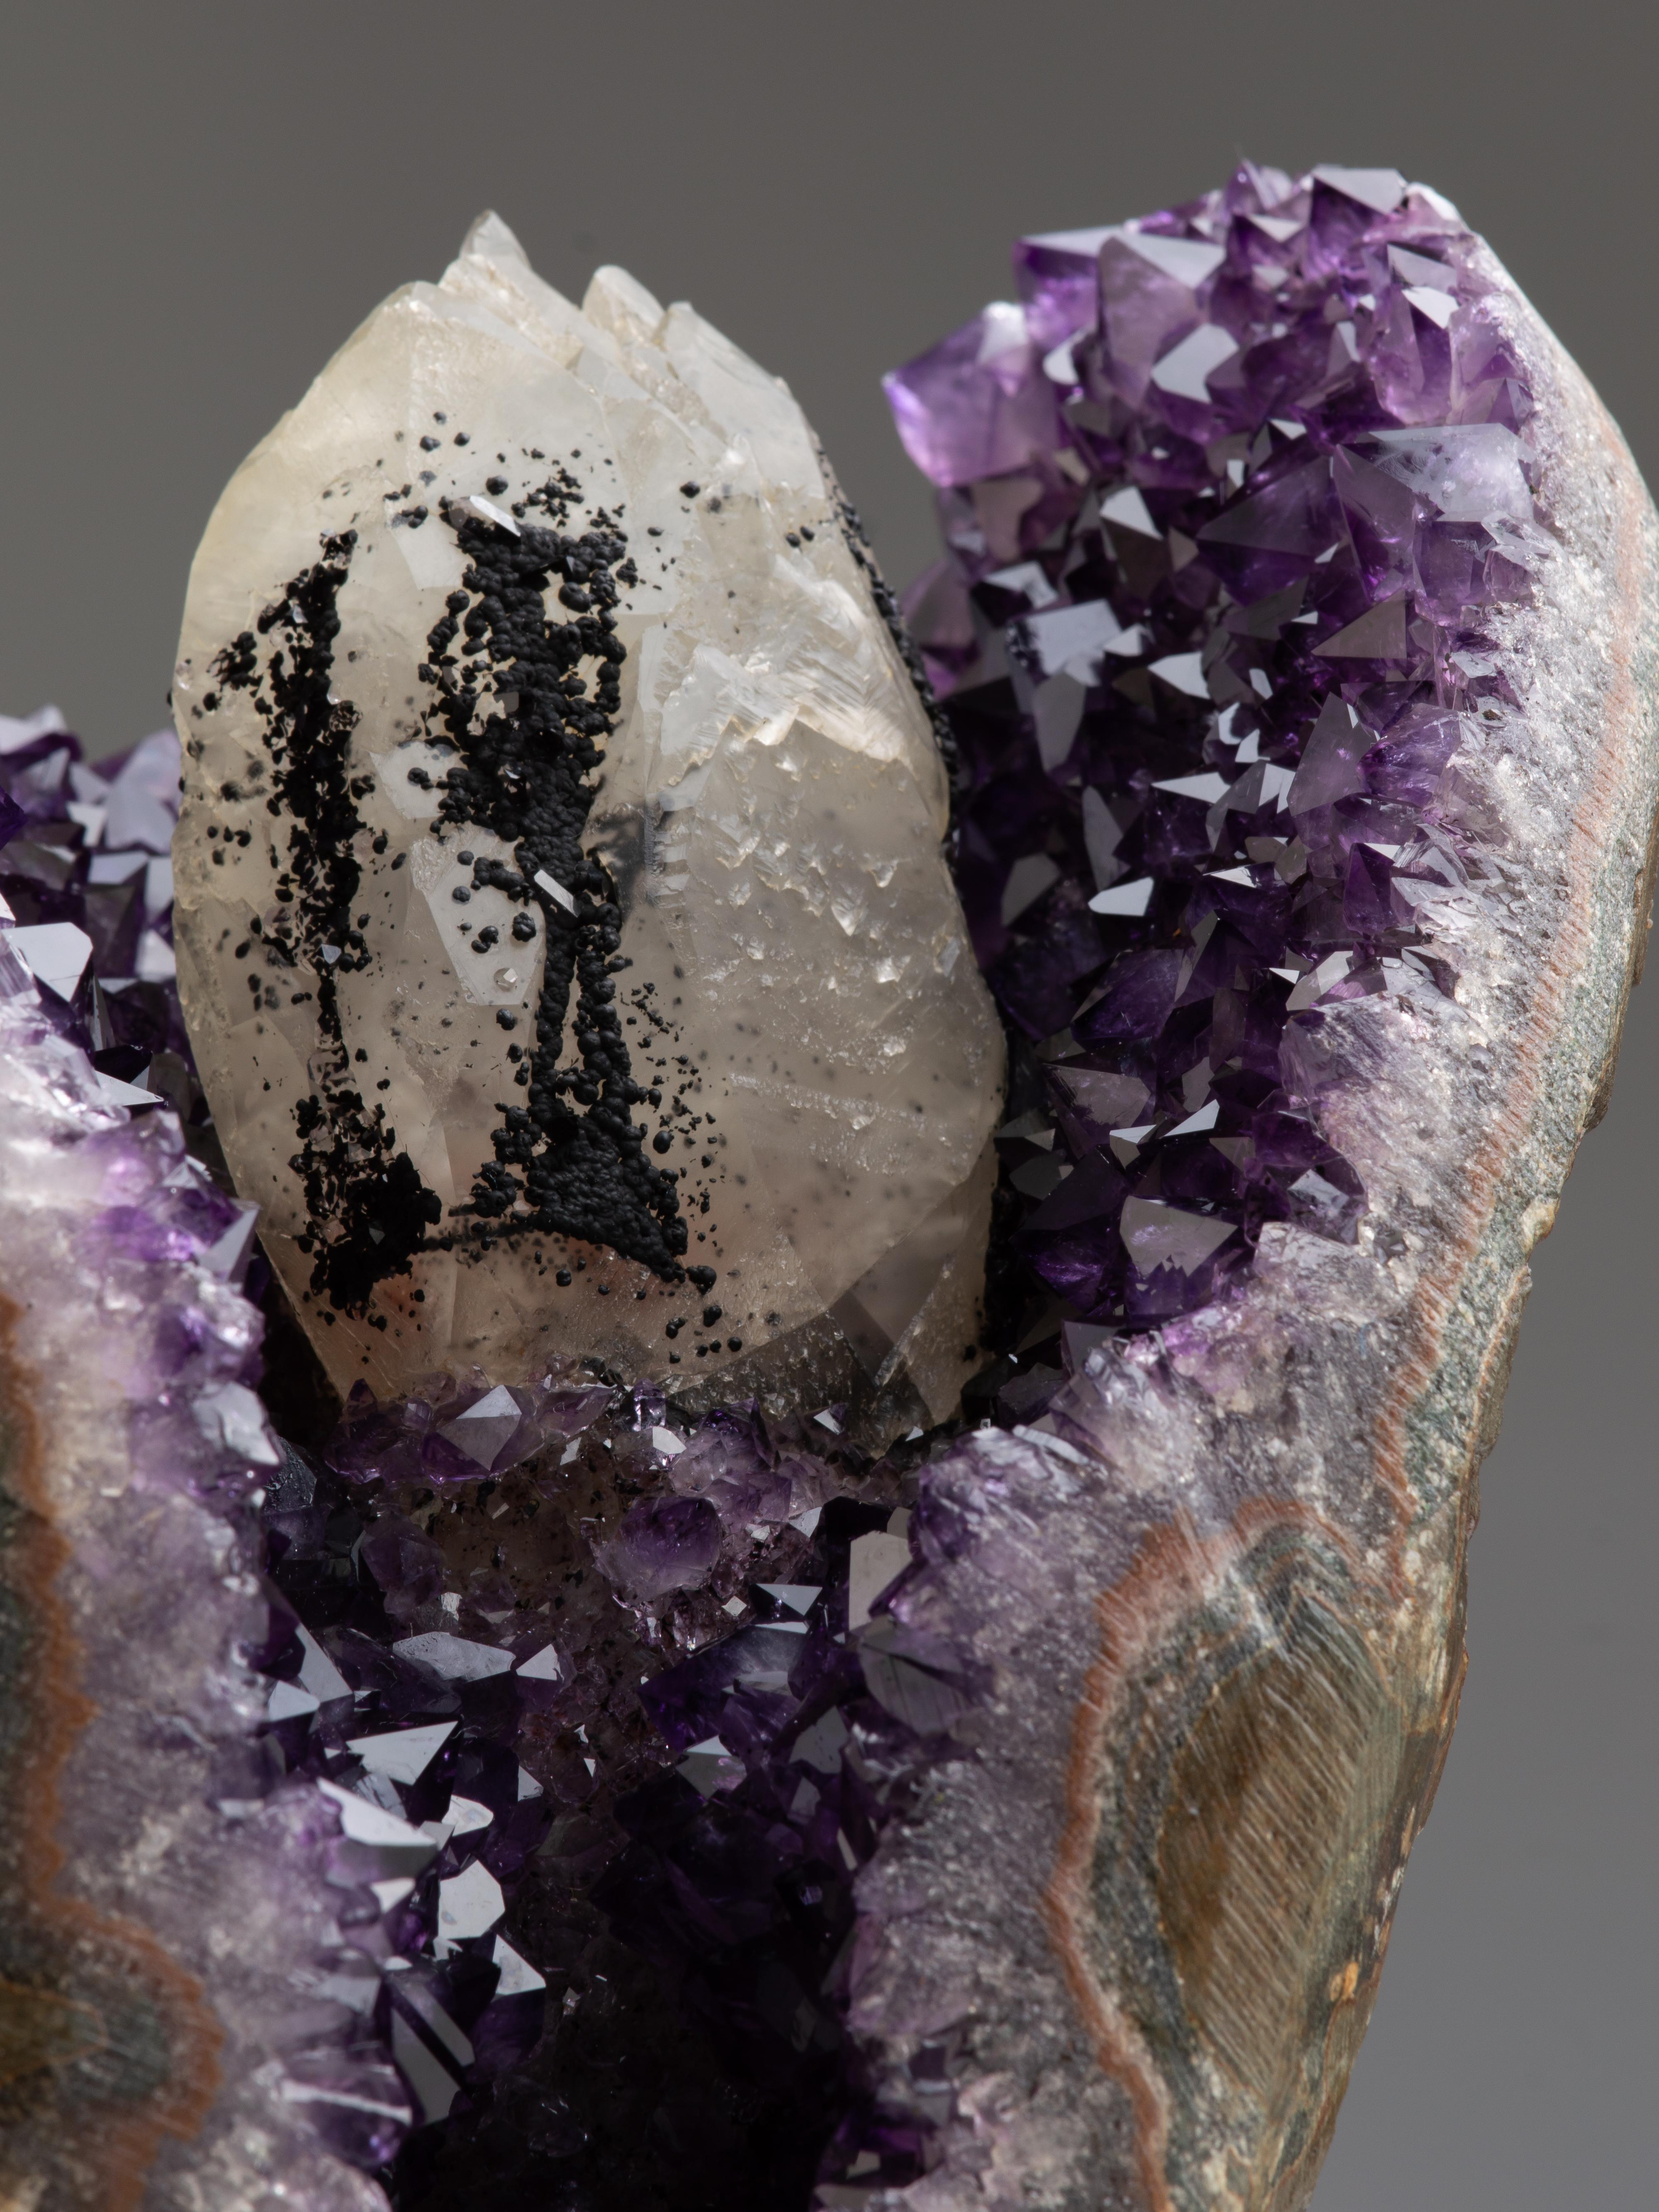 Angel Shaped Amethyst Crystals and Calcite mineral formation 4